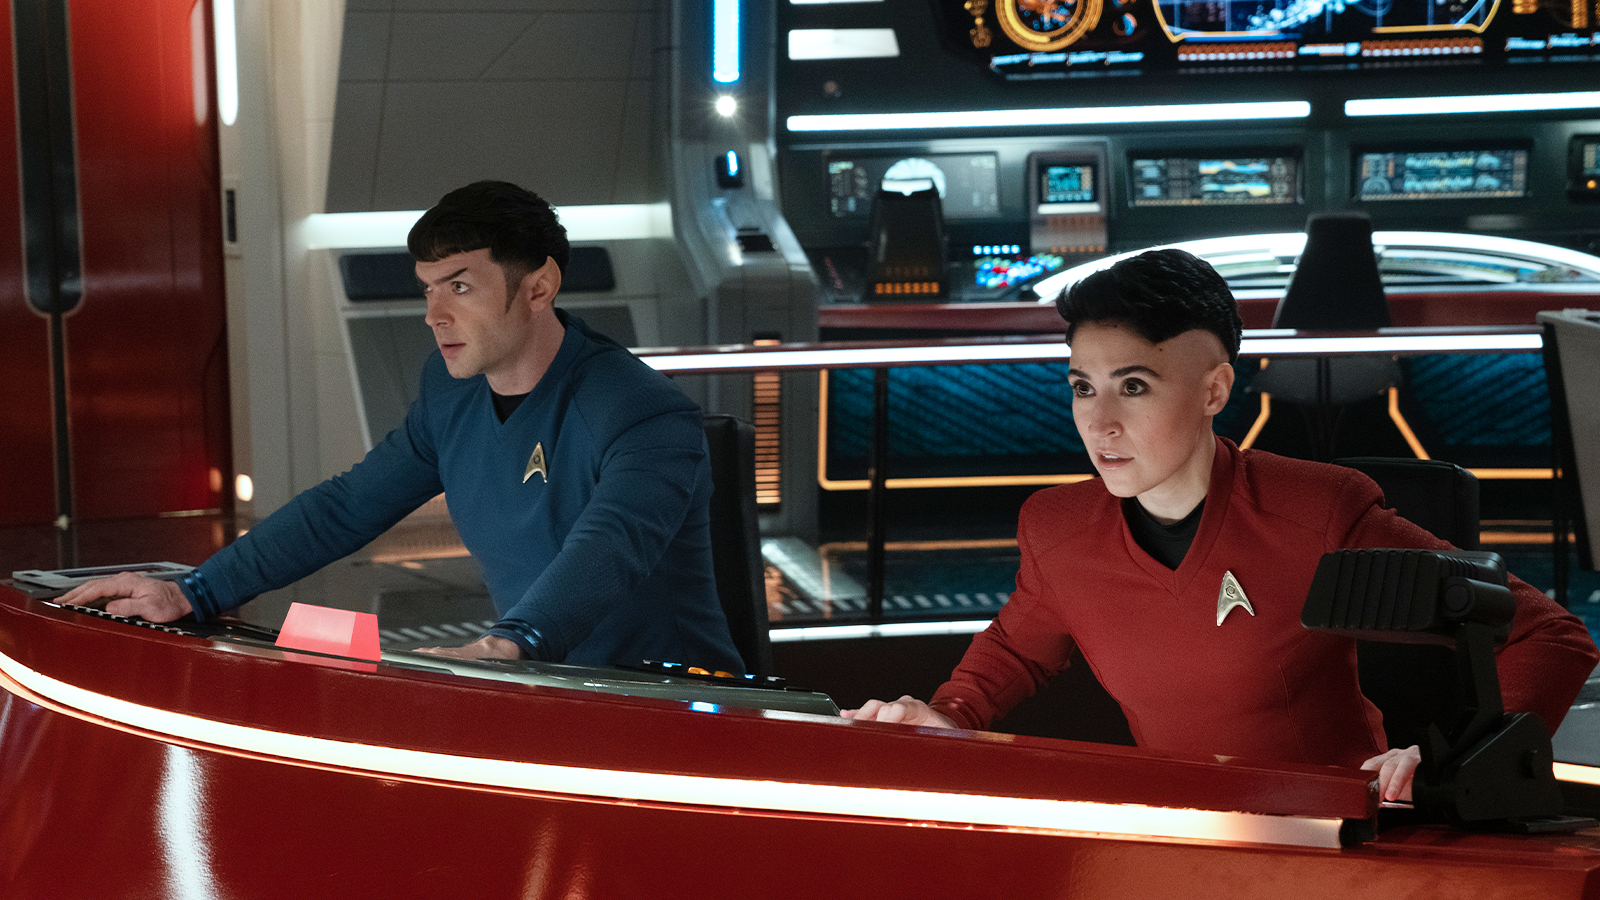 Star Trek: Strange New Worlds "Among the Lotus Eaters" preview + new photos